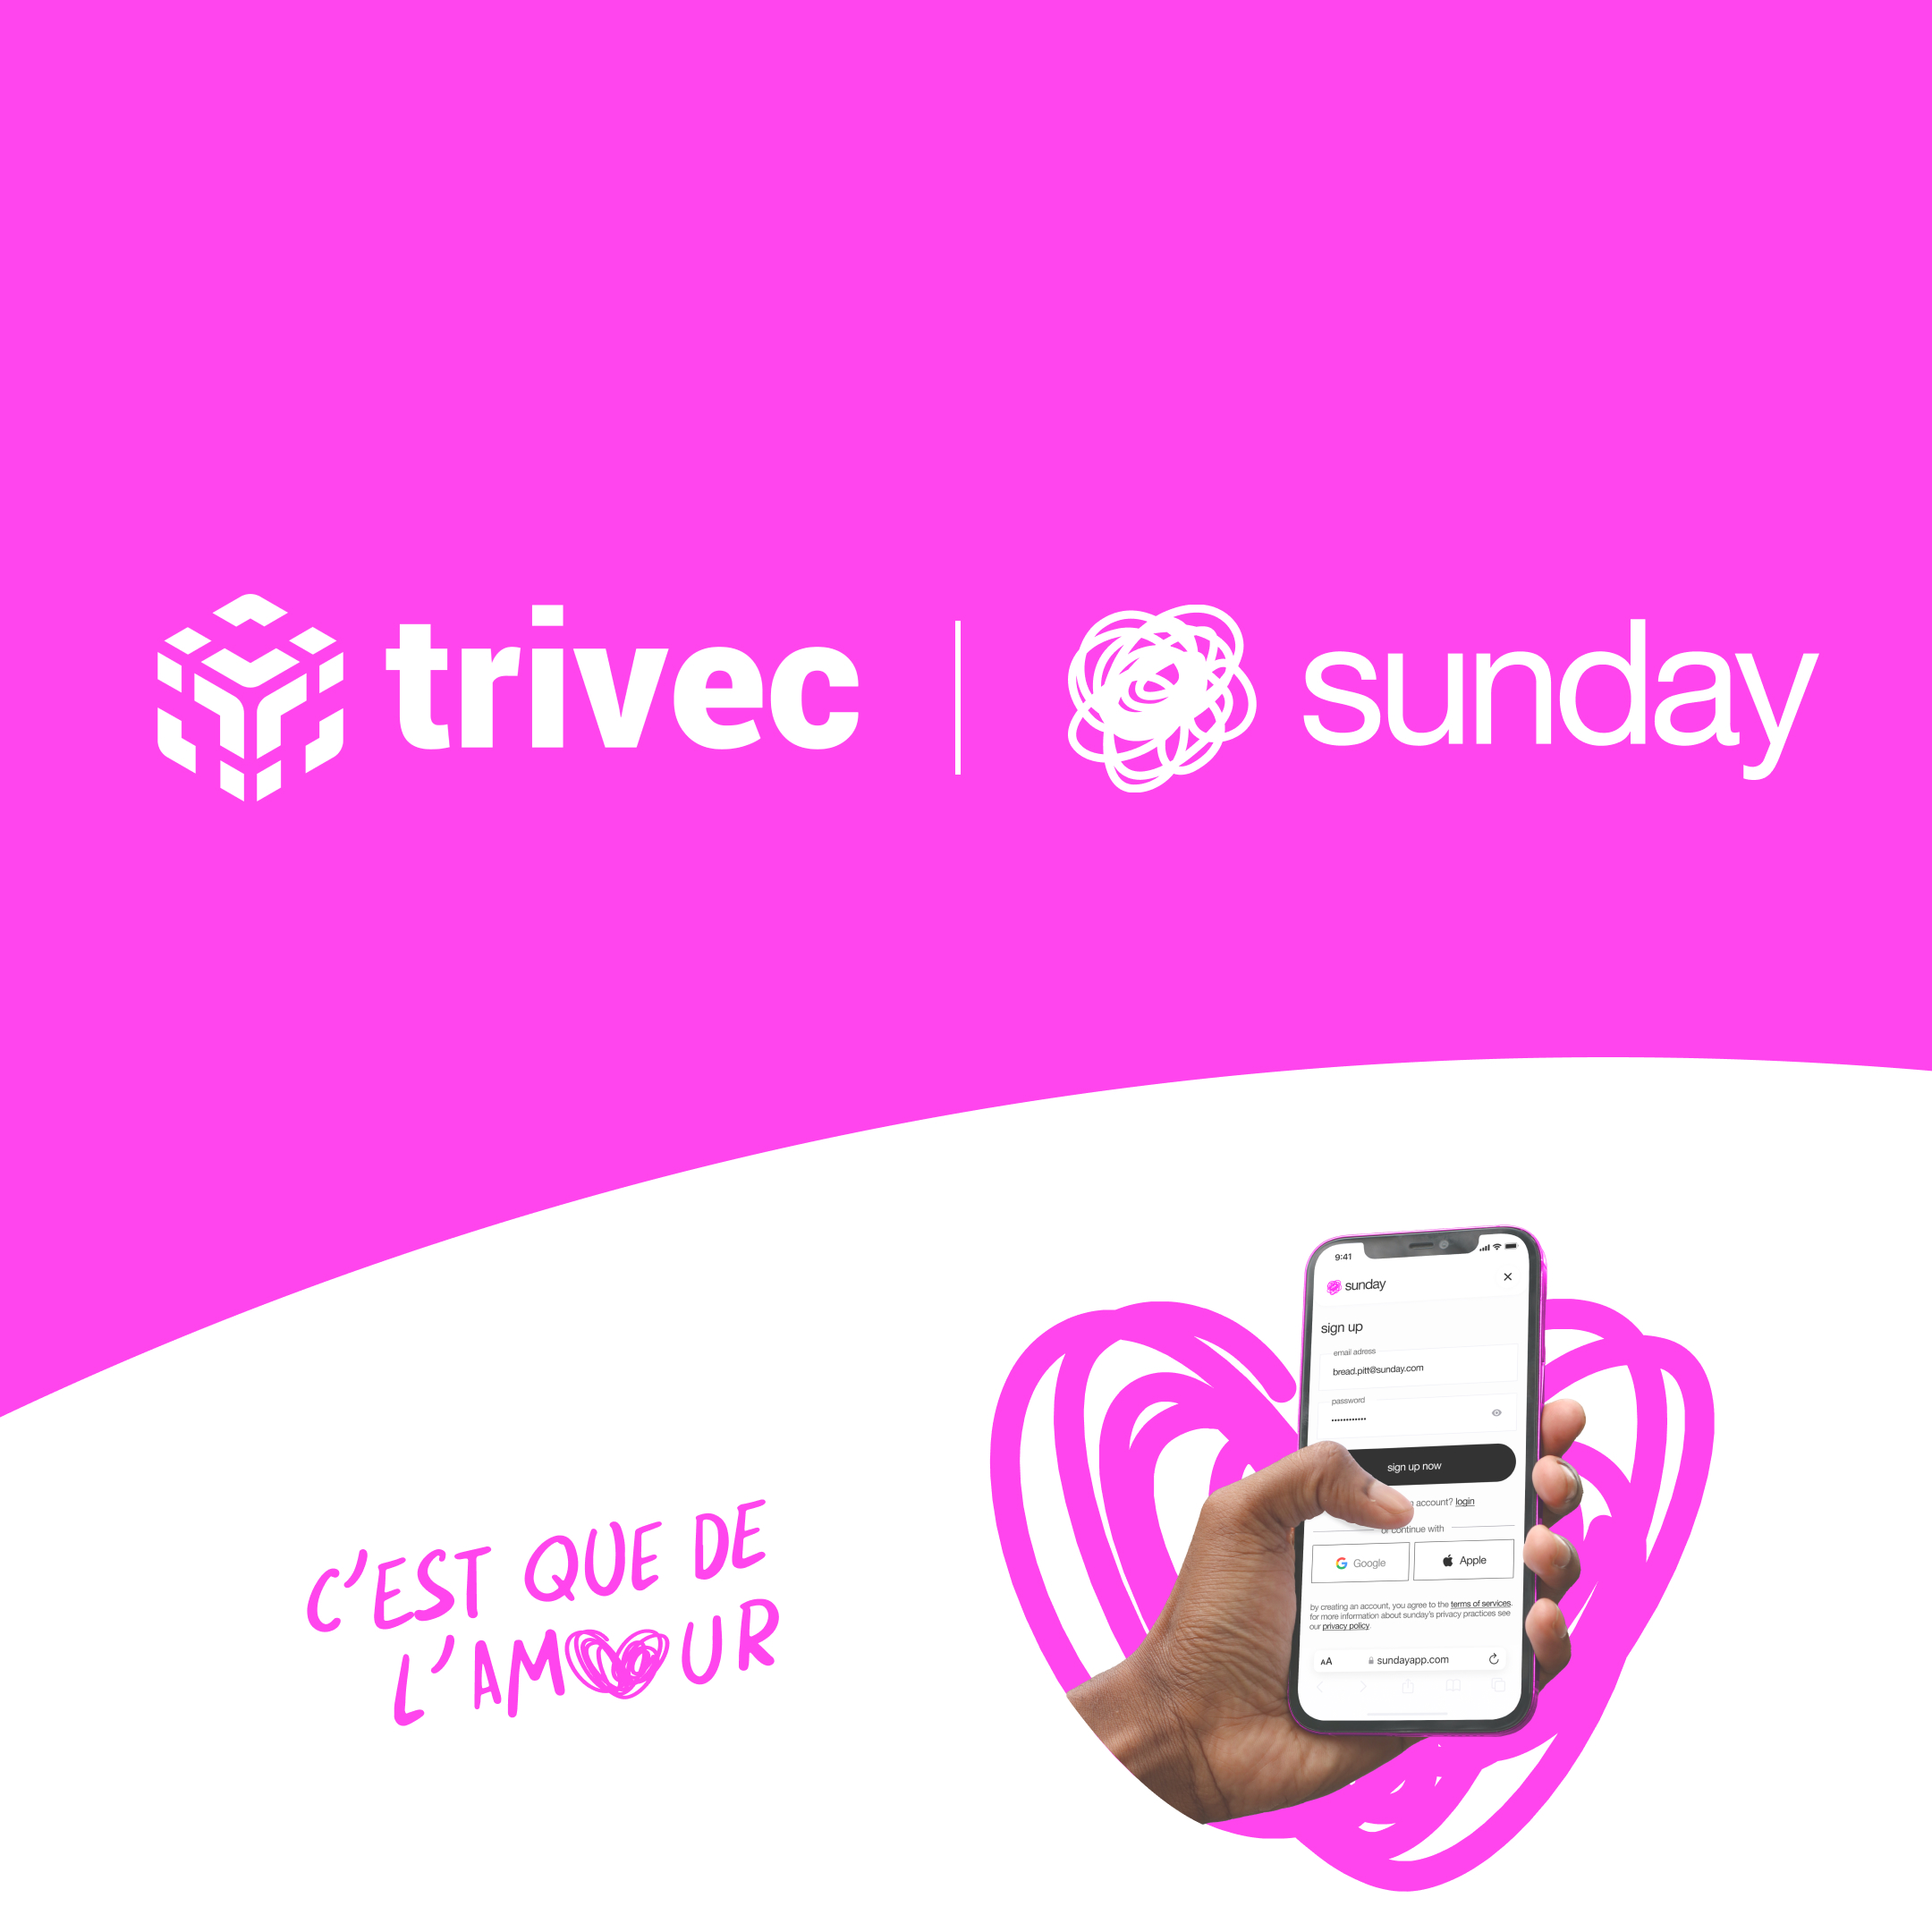 sunday partners with Trivec